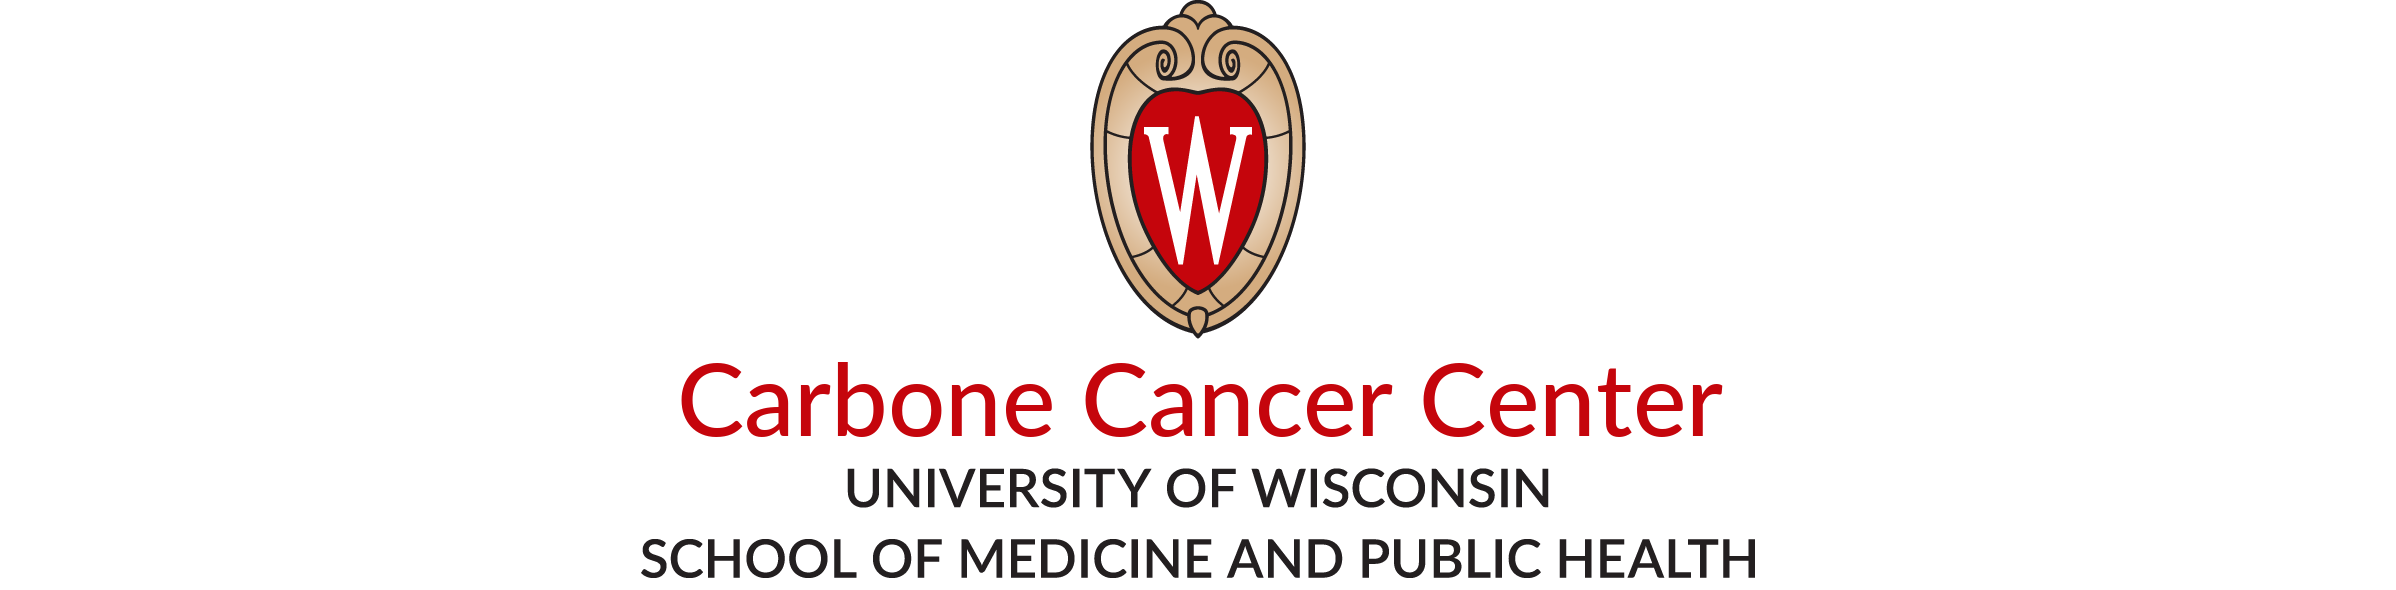 University of Wisconsin Carbone Cancer Center webpage